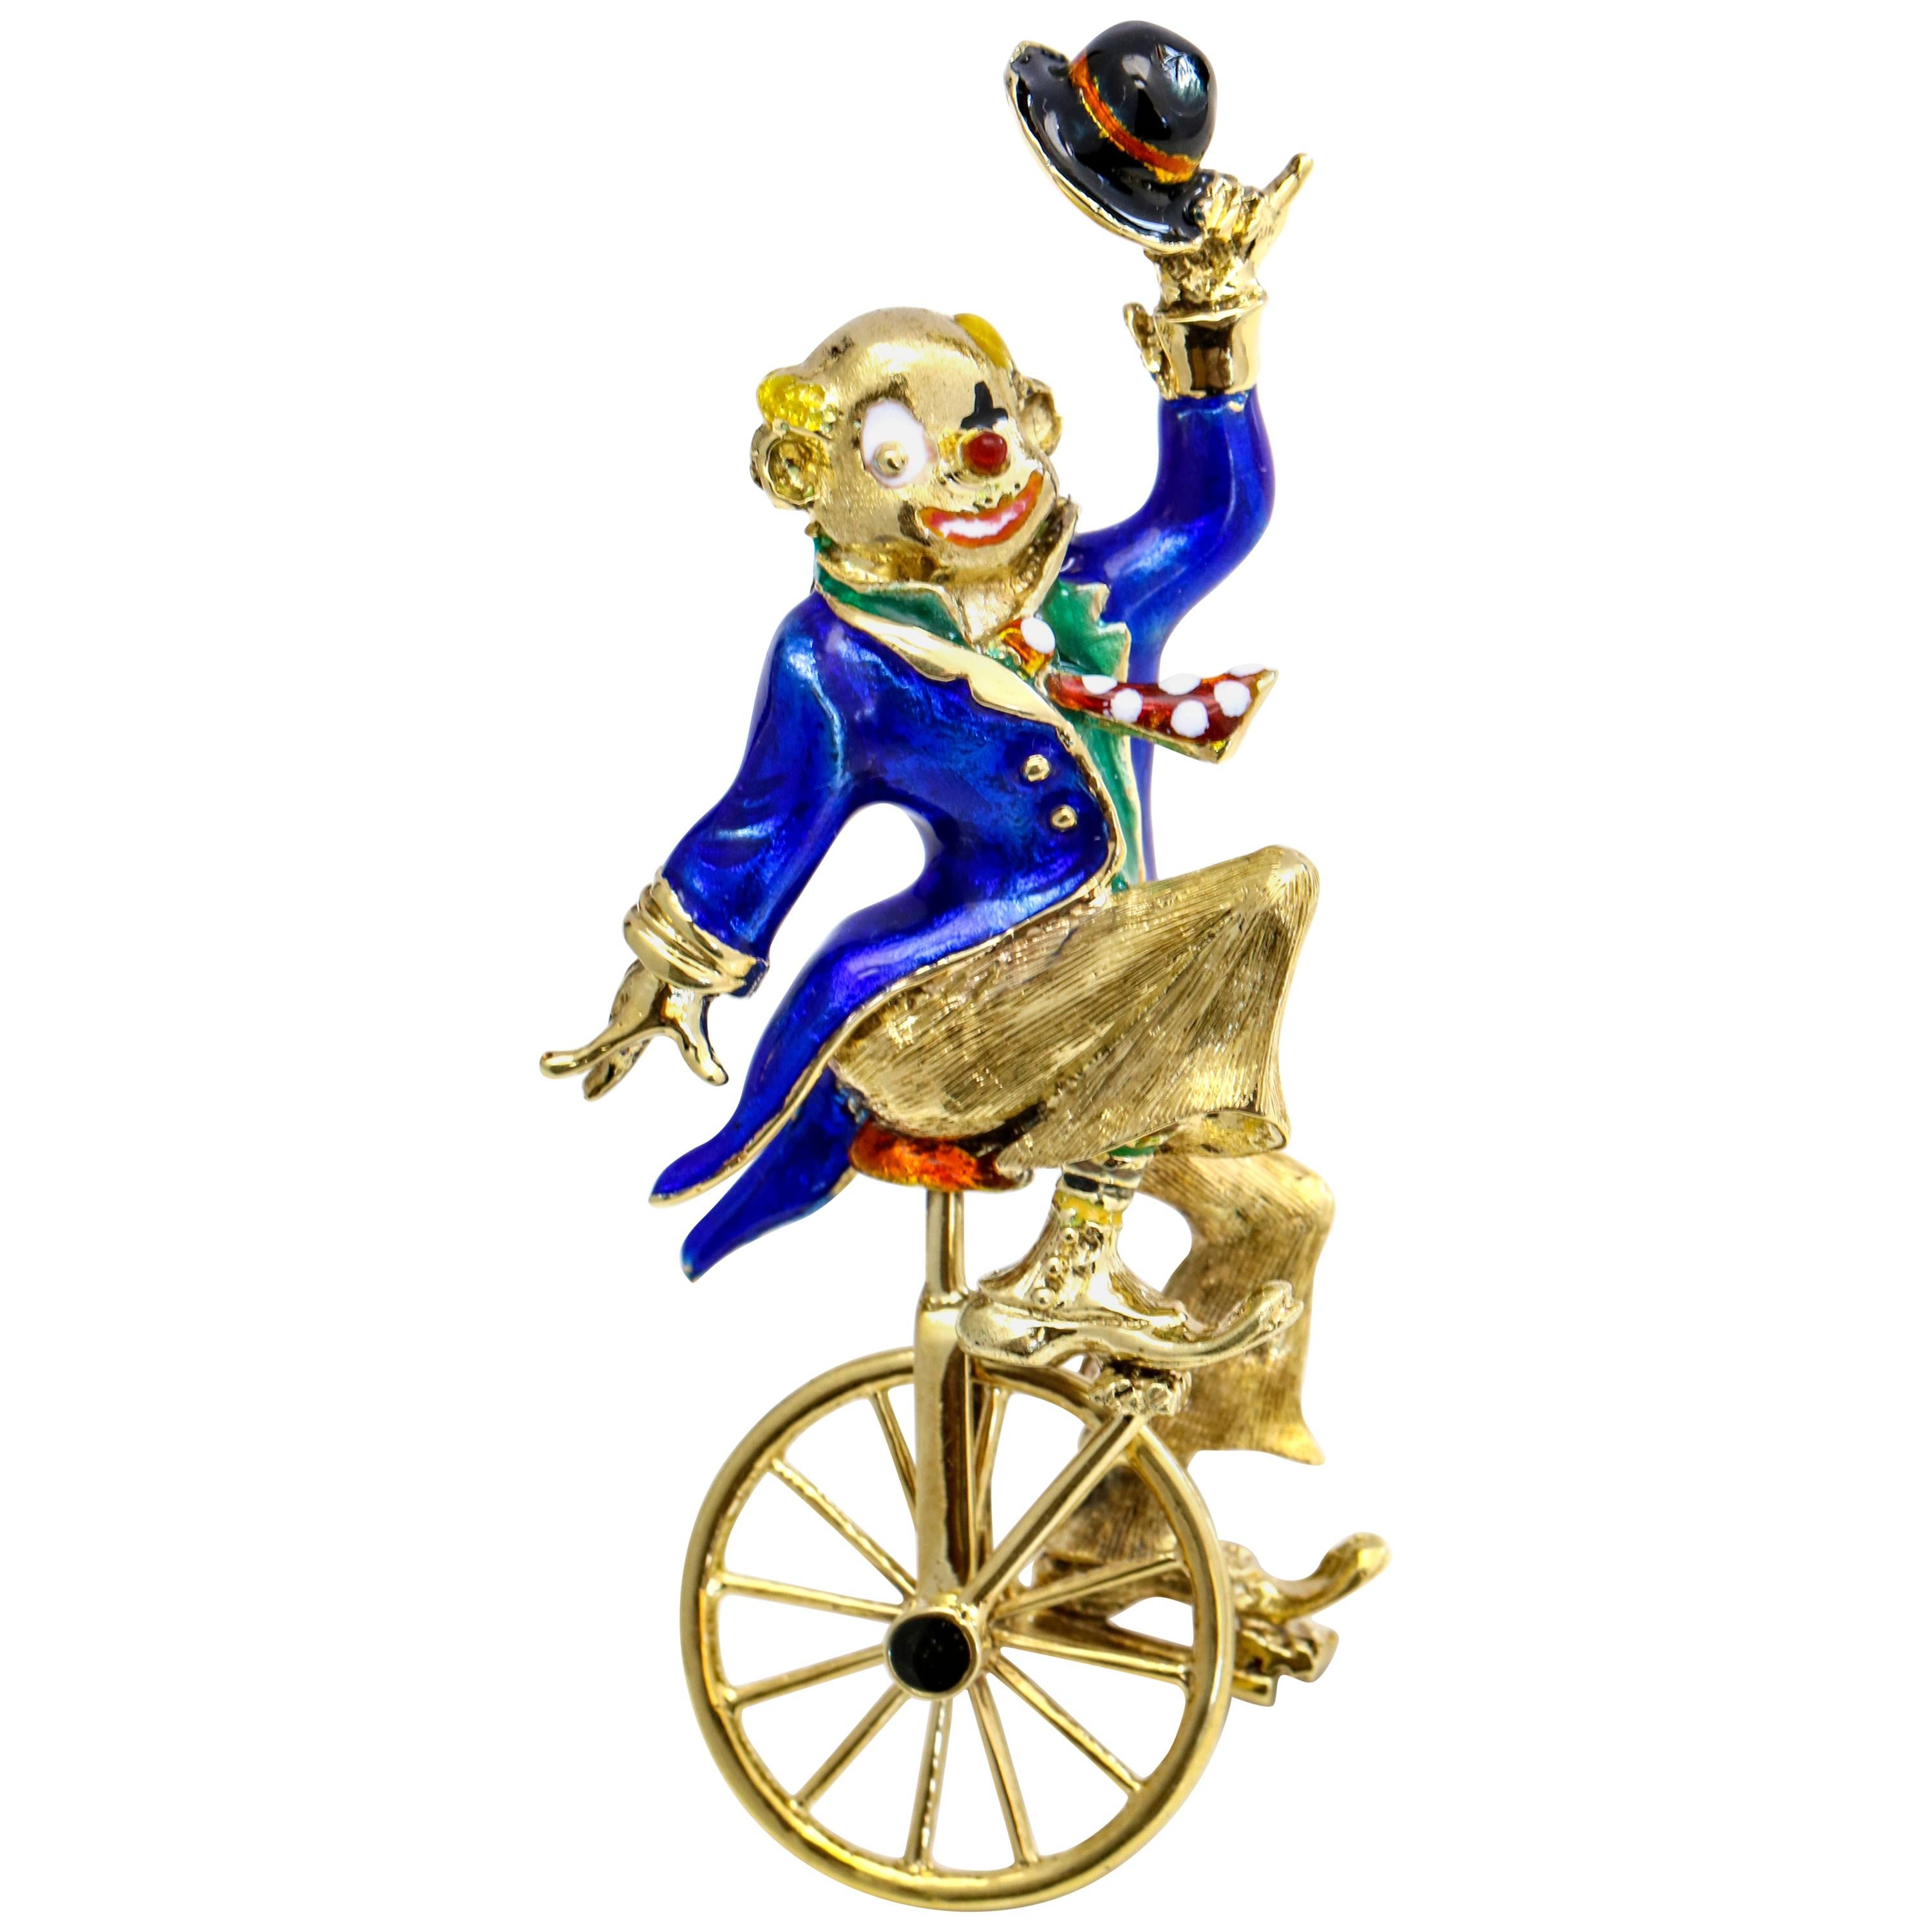 14 Karat Yellow Gold Clown Riding a Unicycle Enamel Brooch For Sale